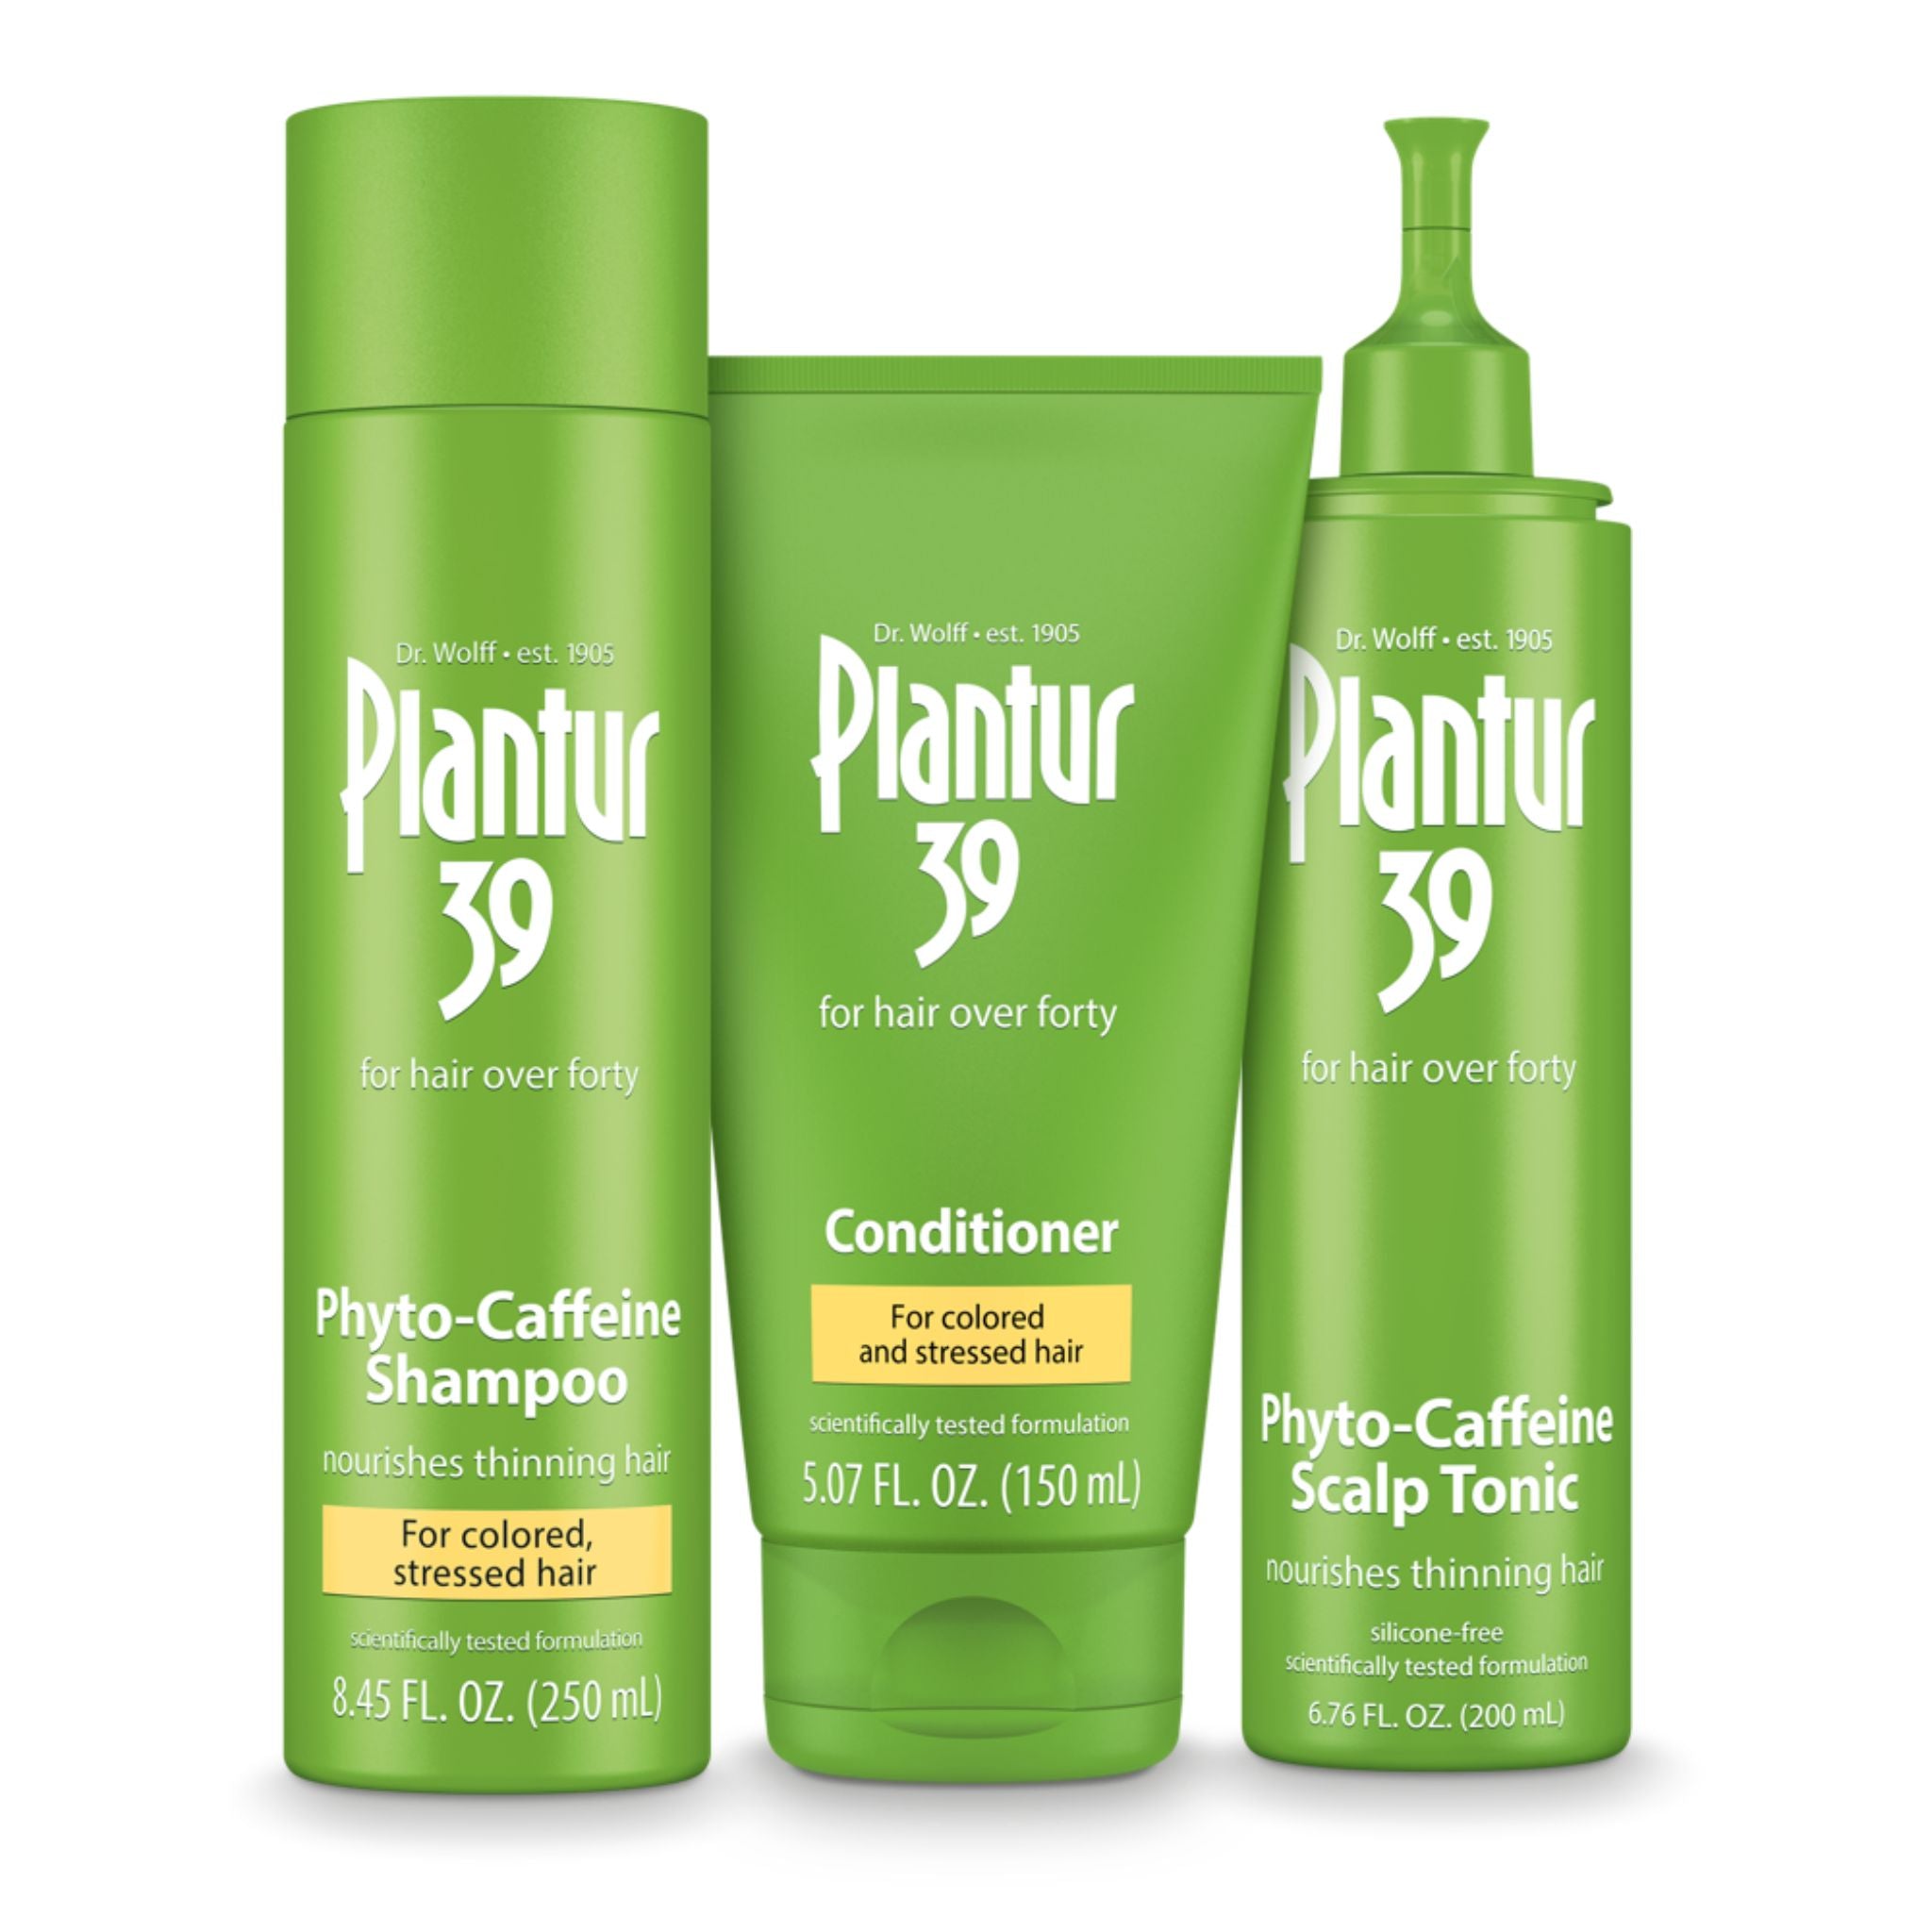 Plantur 39 Phyto-Caffeine Shampoo, Conditioner, Tonic for Colored, Stressed Hair